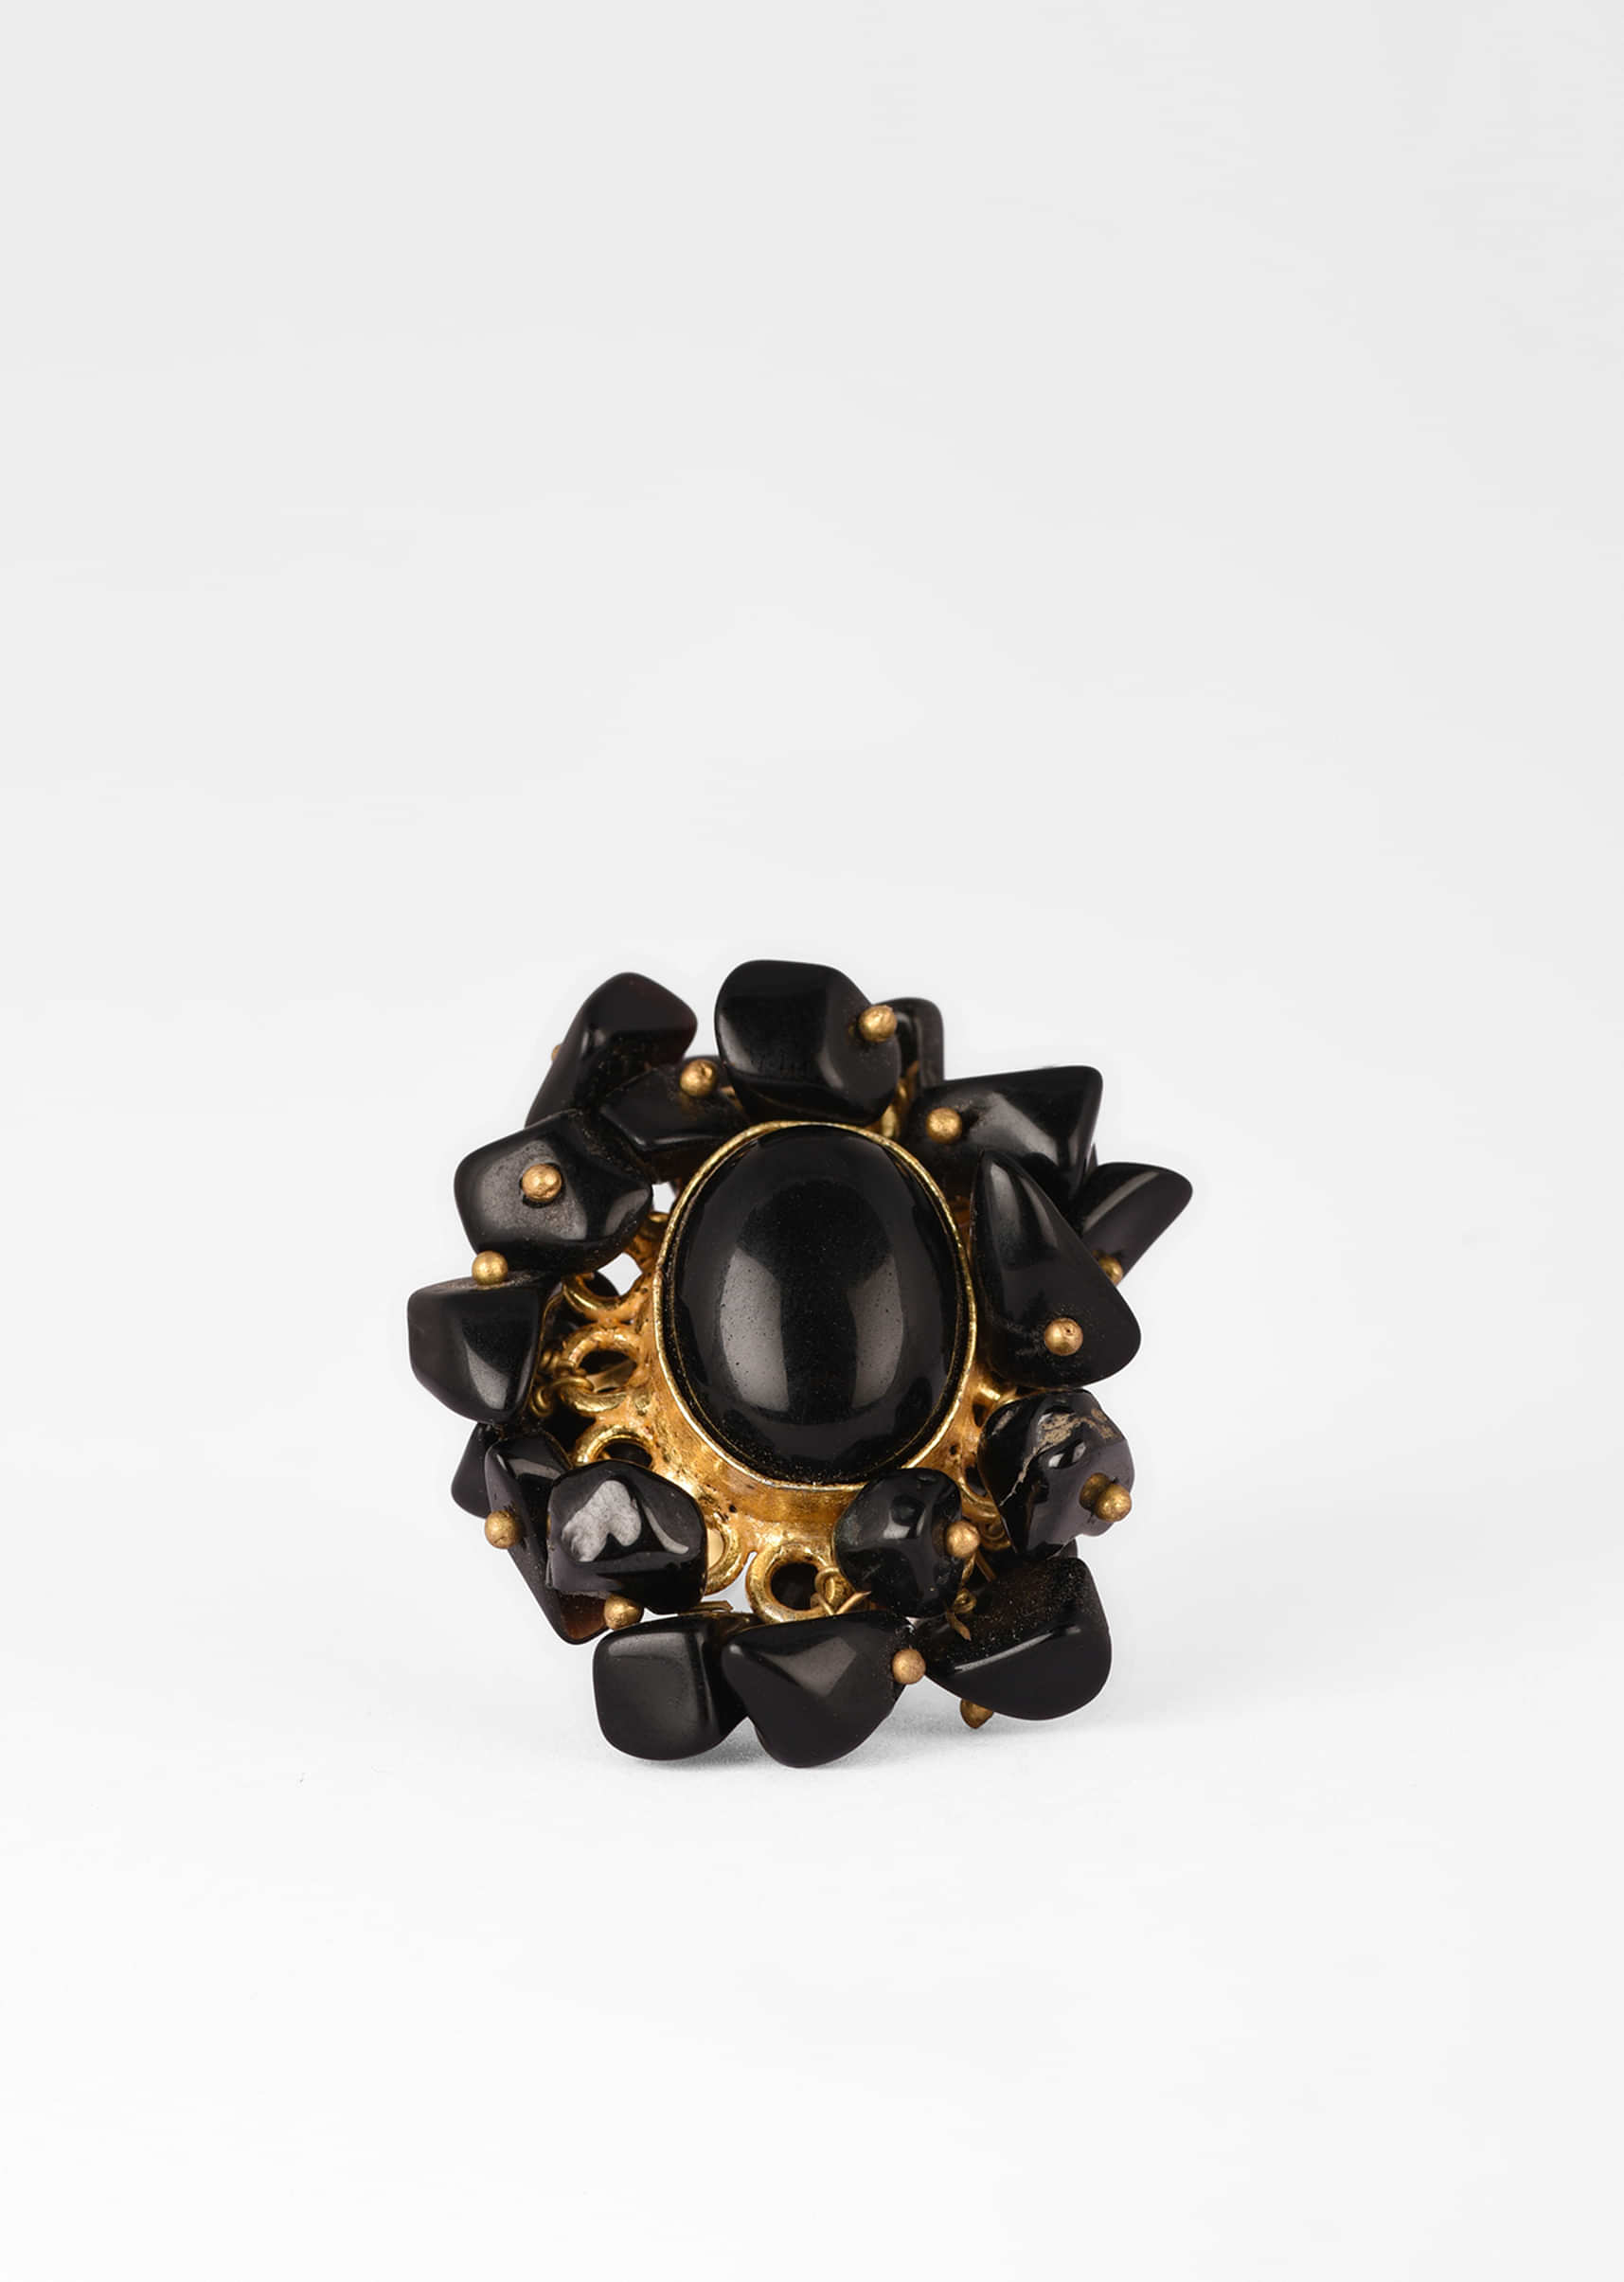 Gold Plated Ring With An Oval Black Semi Precious Stone Centre And Tiny Stone Pieces All Over 